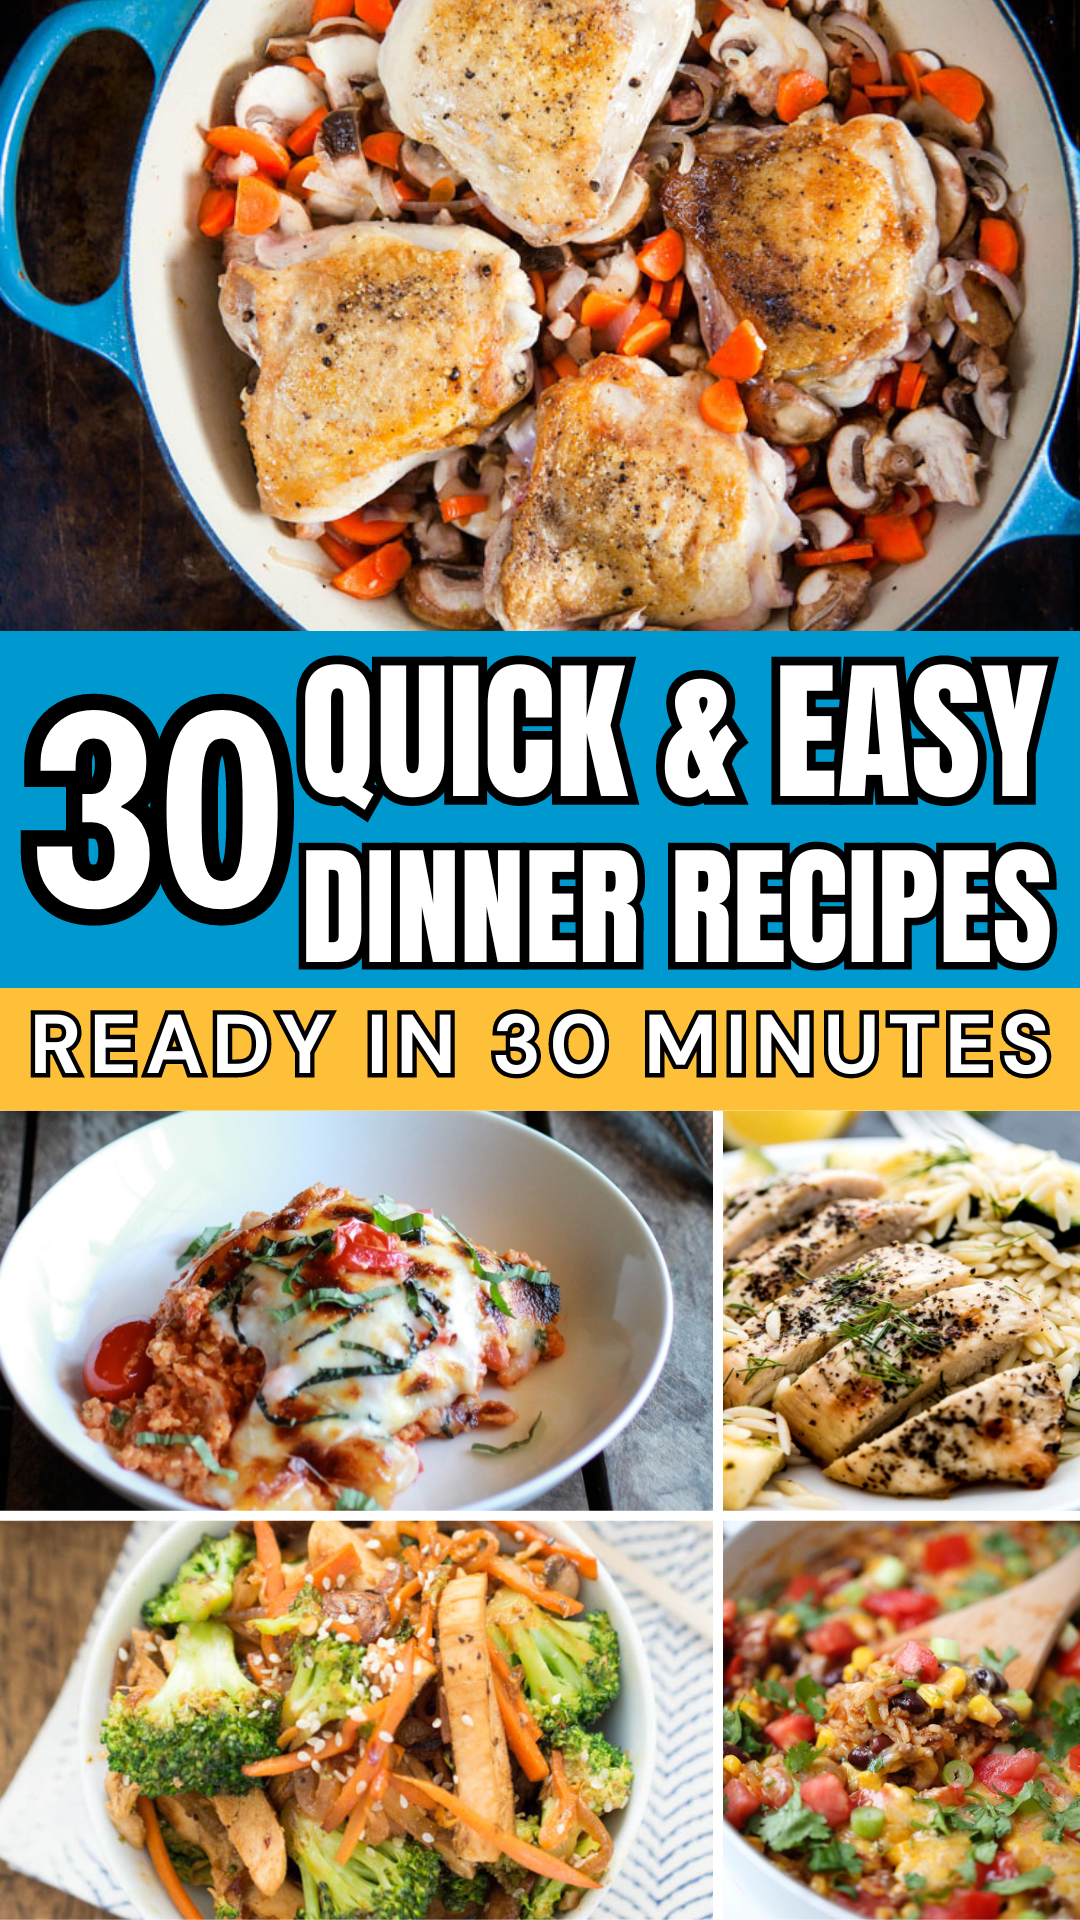 🍲 Quick & Tasty! 30 Easy Weeknight Dinners for the Whole Family, Faster than Takeout! 🚀🍴